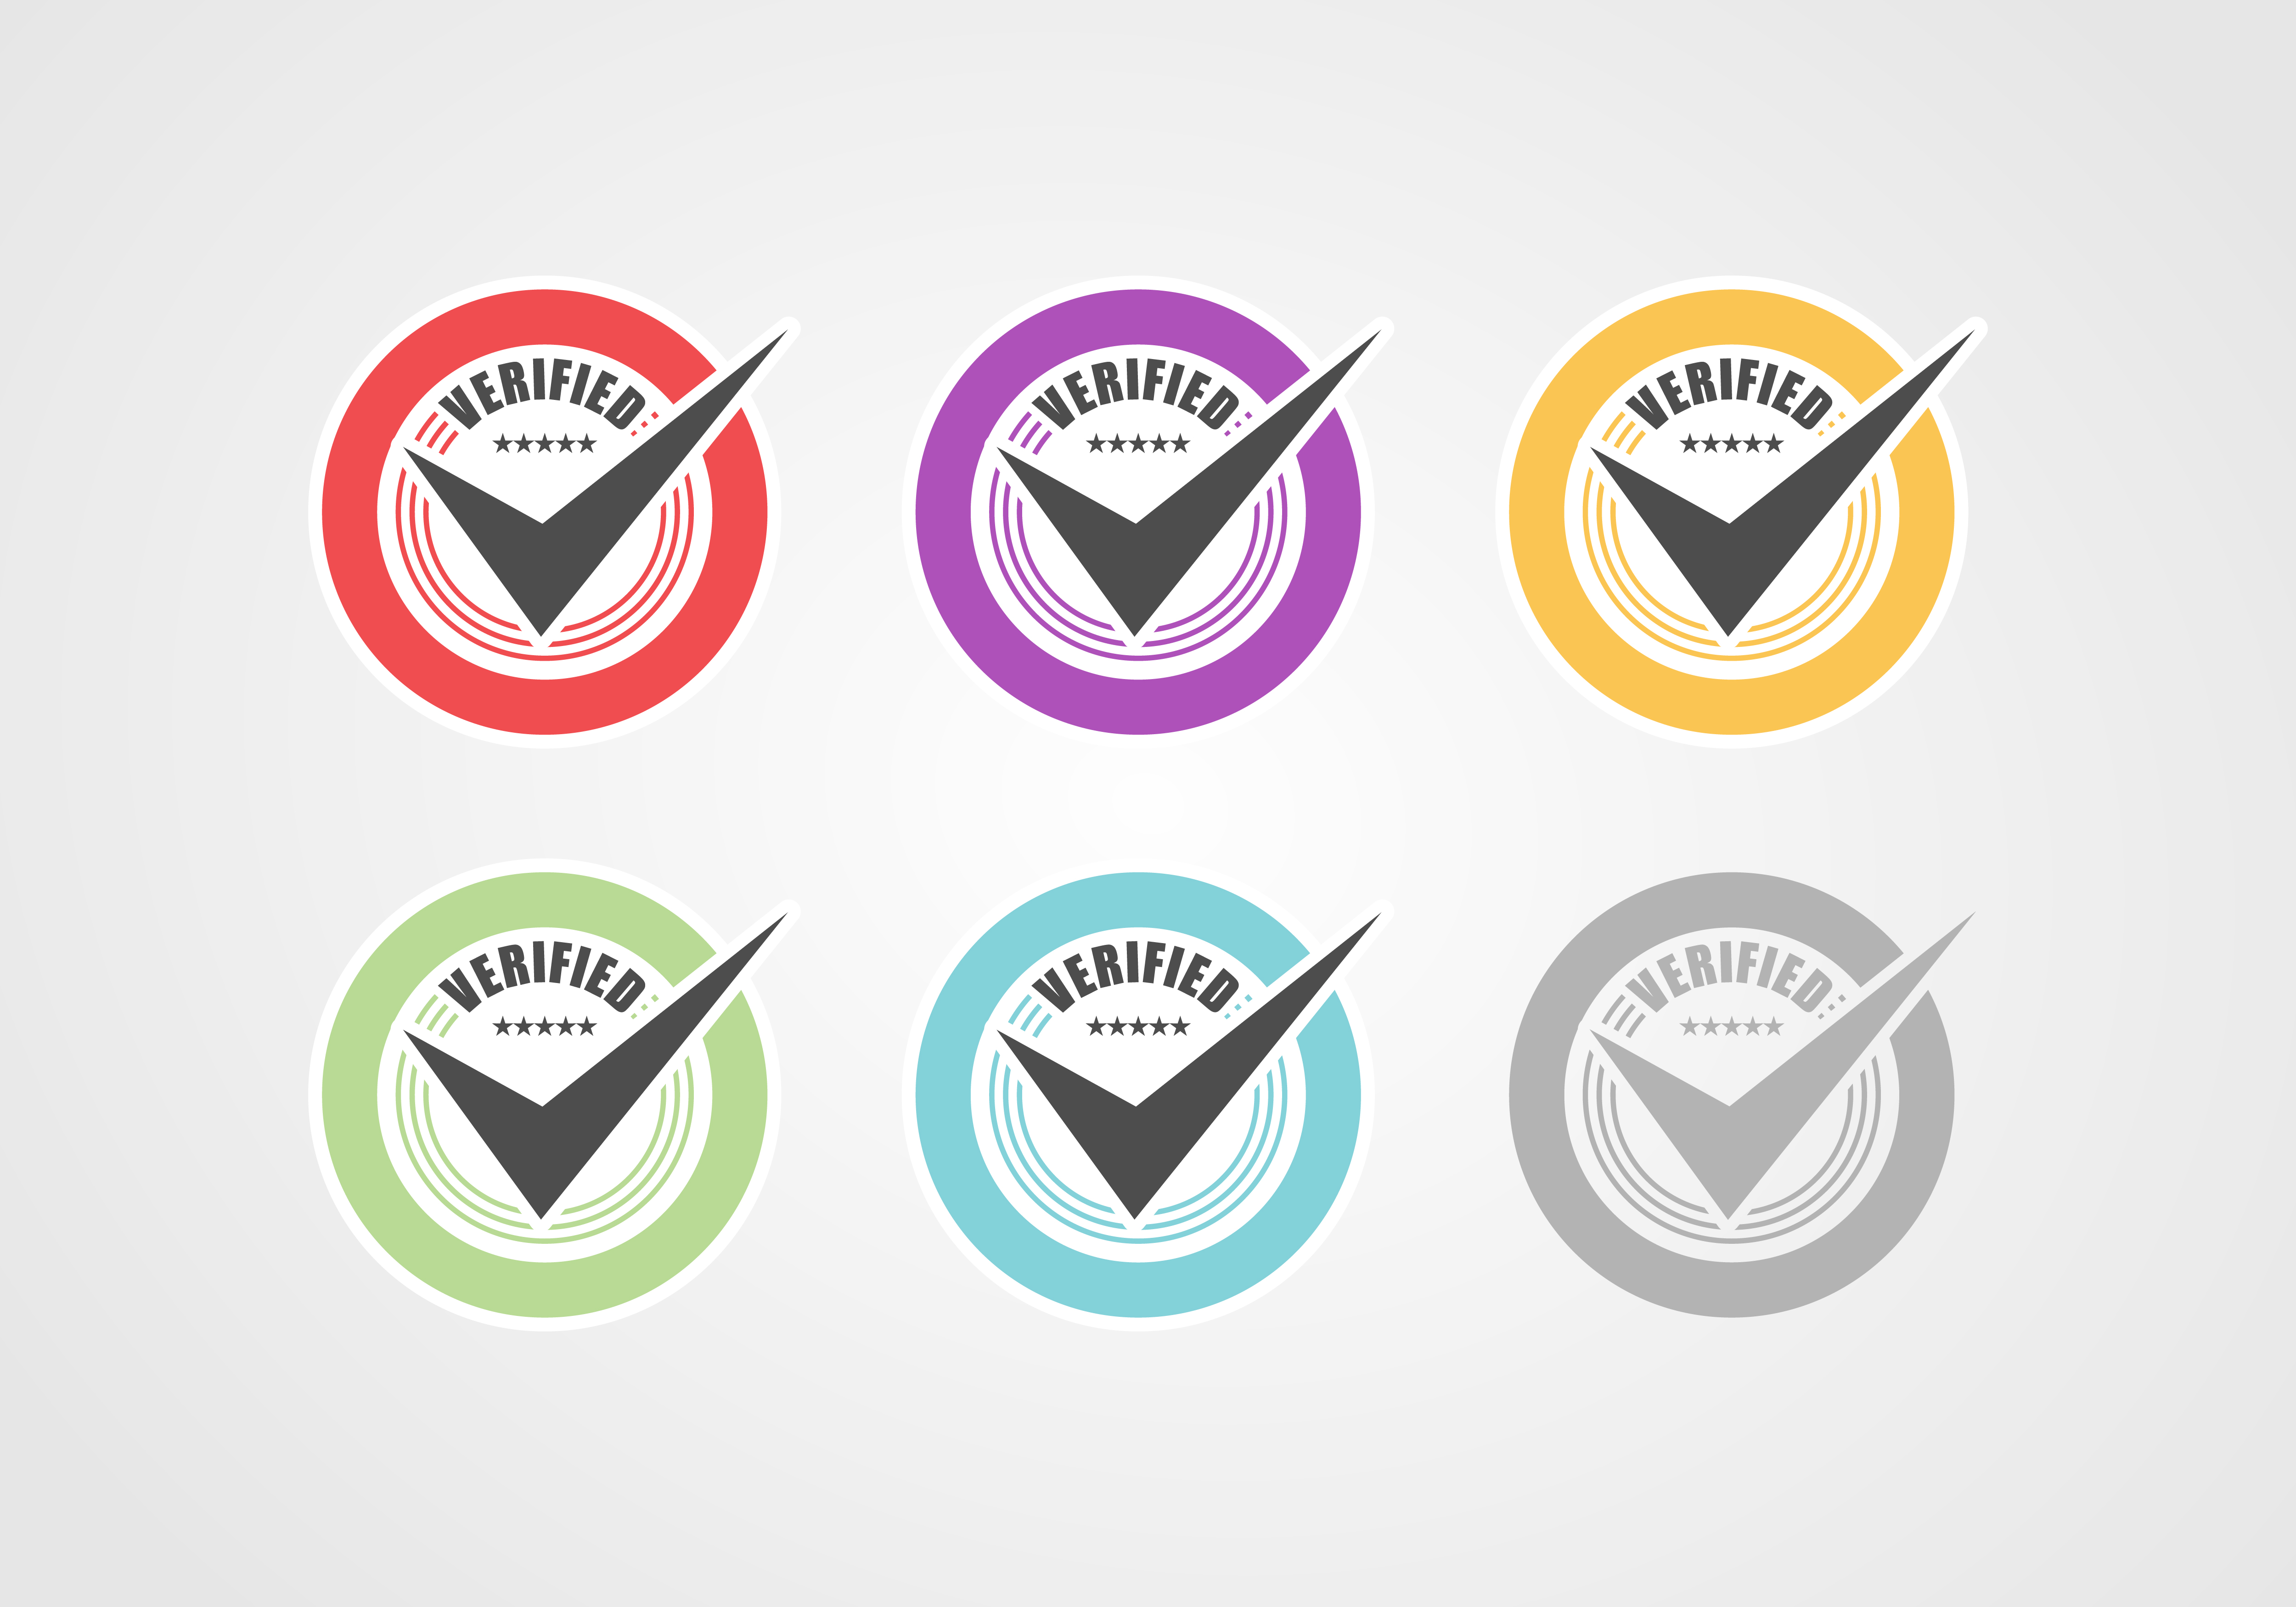 Verified Badge Collection 999536 - Download Free Vectors, Clipart ...